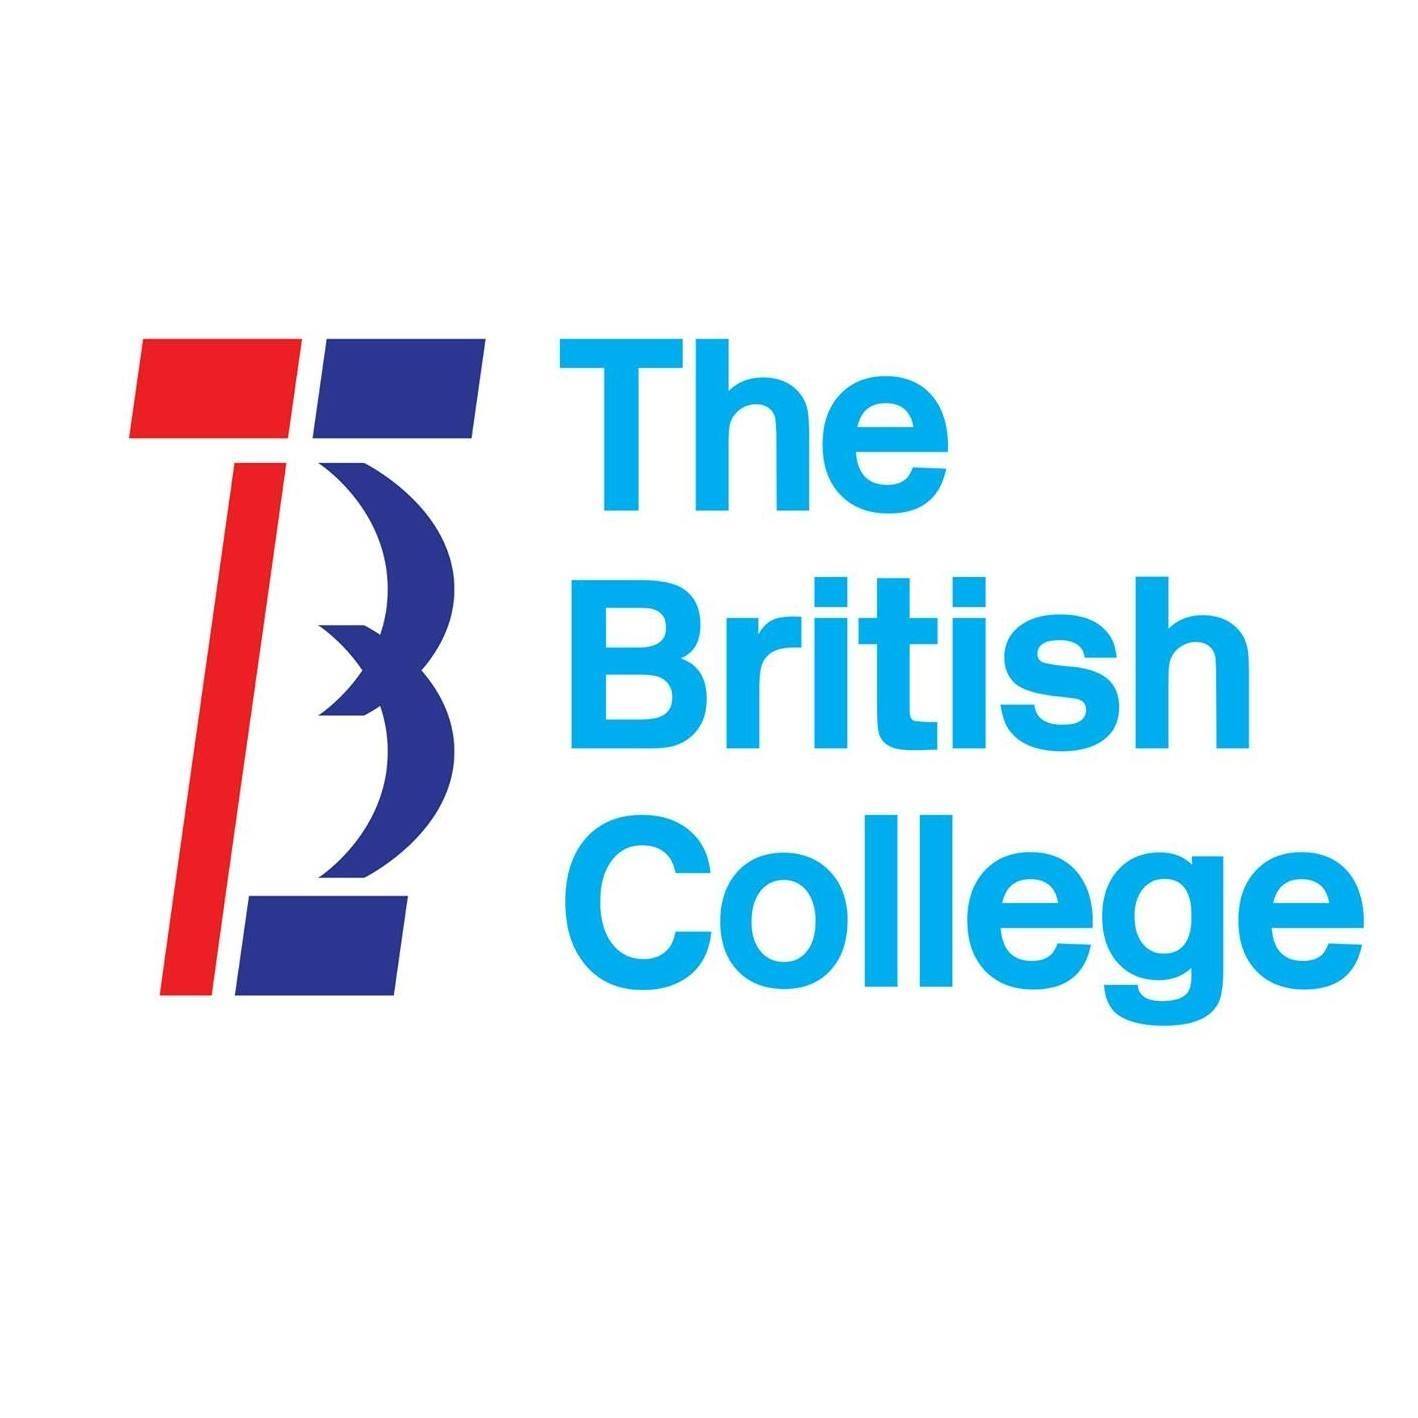  The British College Launches Nepal's First BSc (Honors) Cyber Security And Digital Forensics Programme